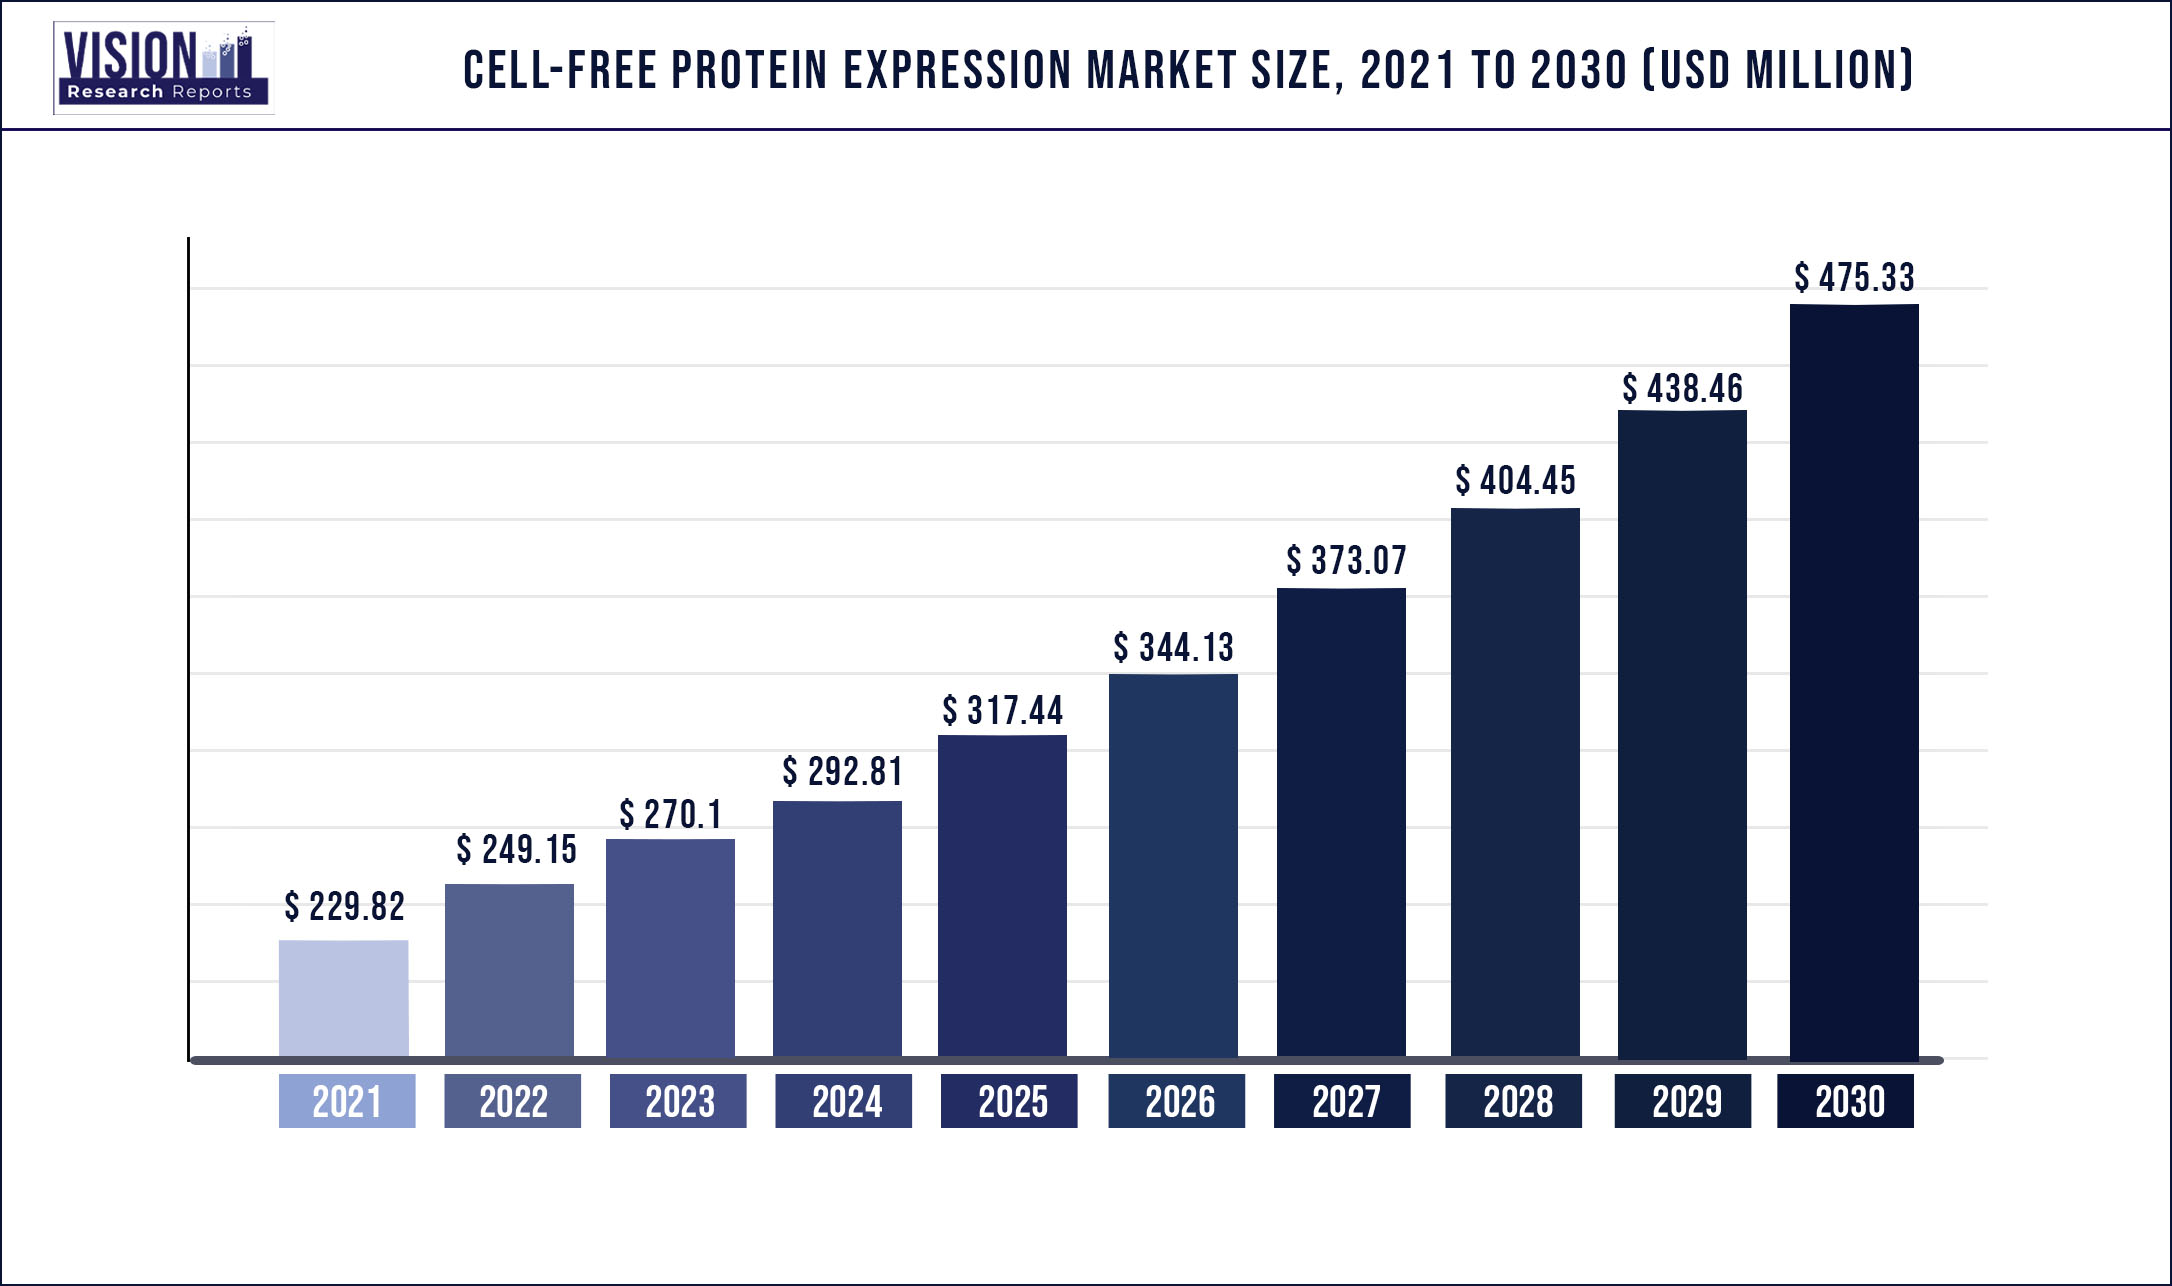 Cell-free Protein Expression Market Size 2021 to 2030